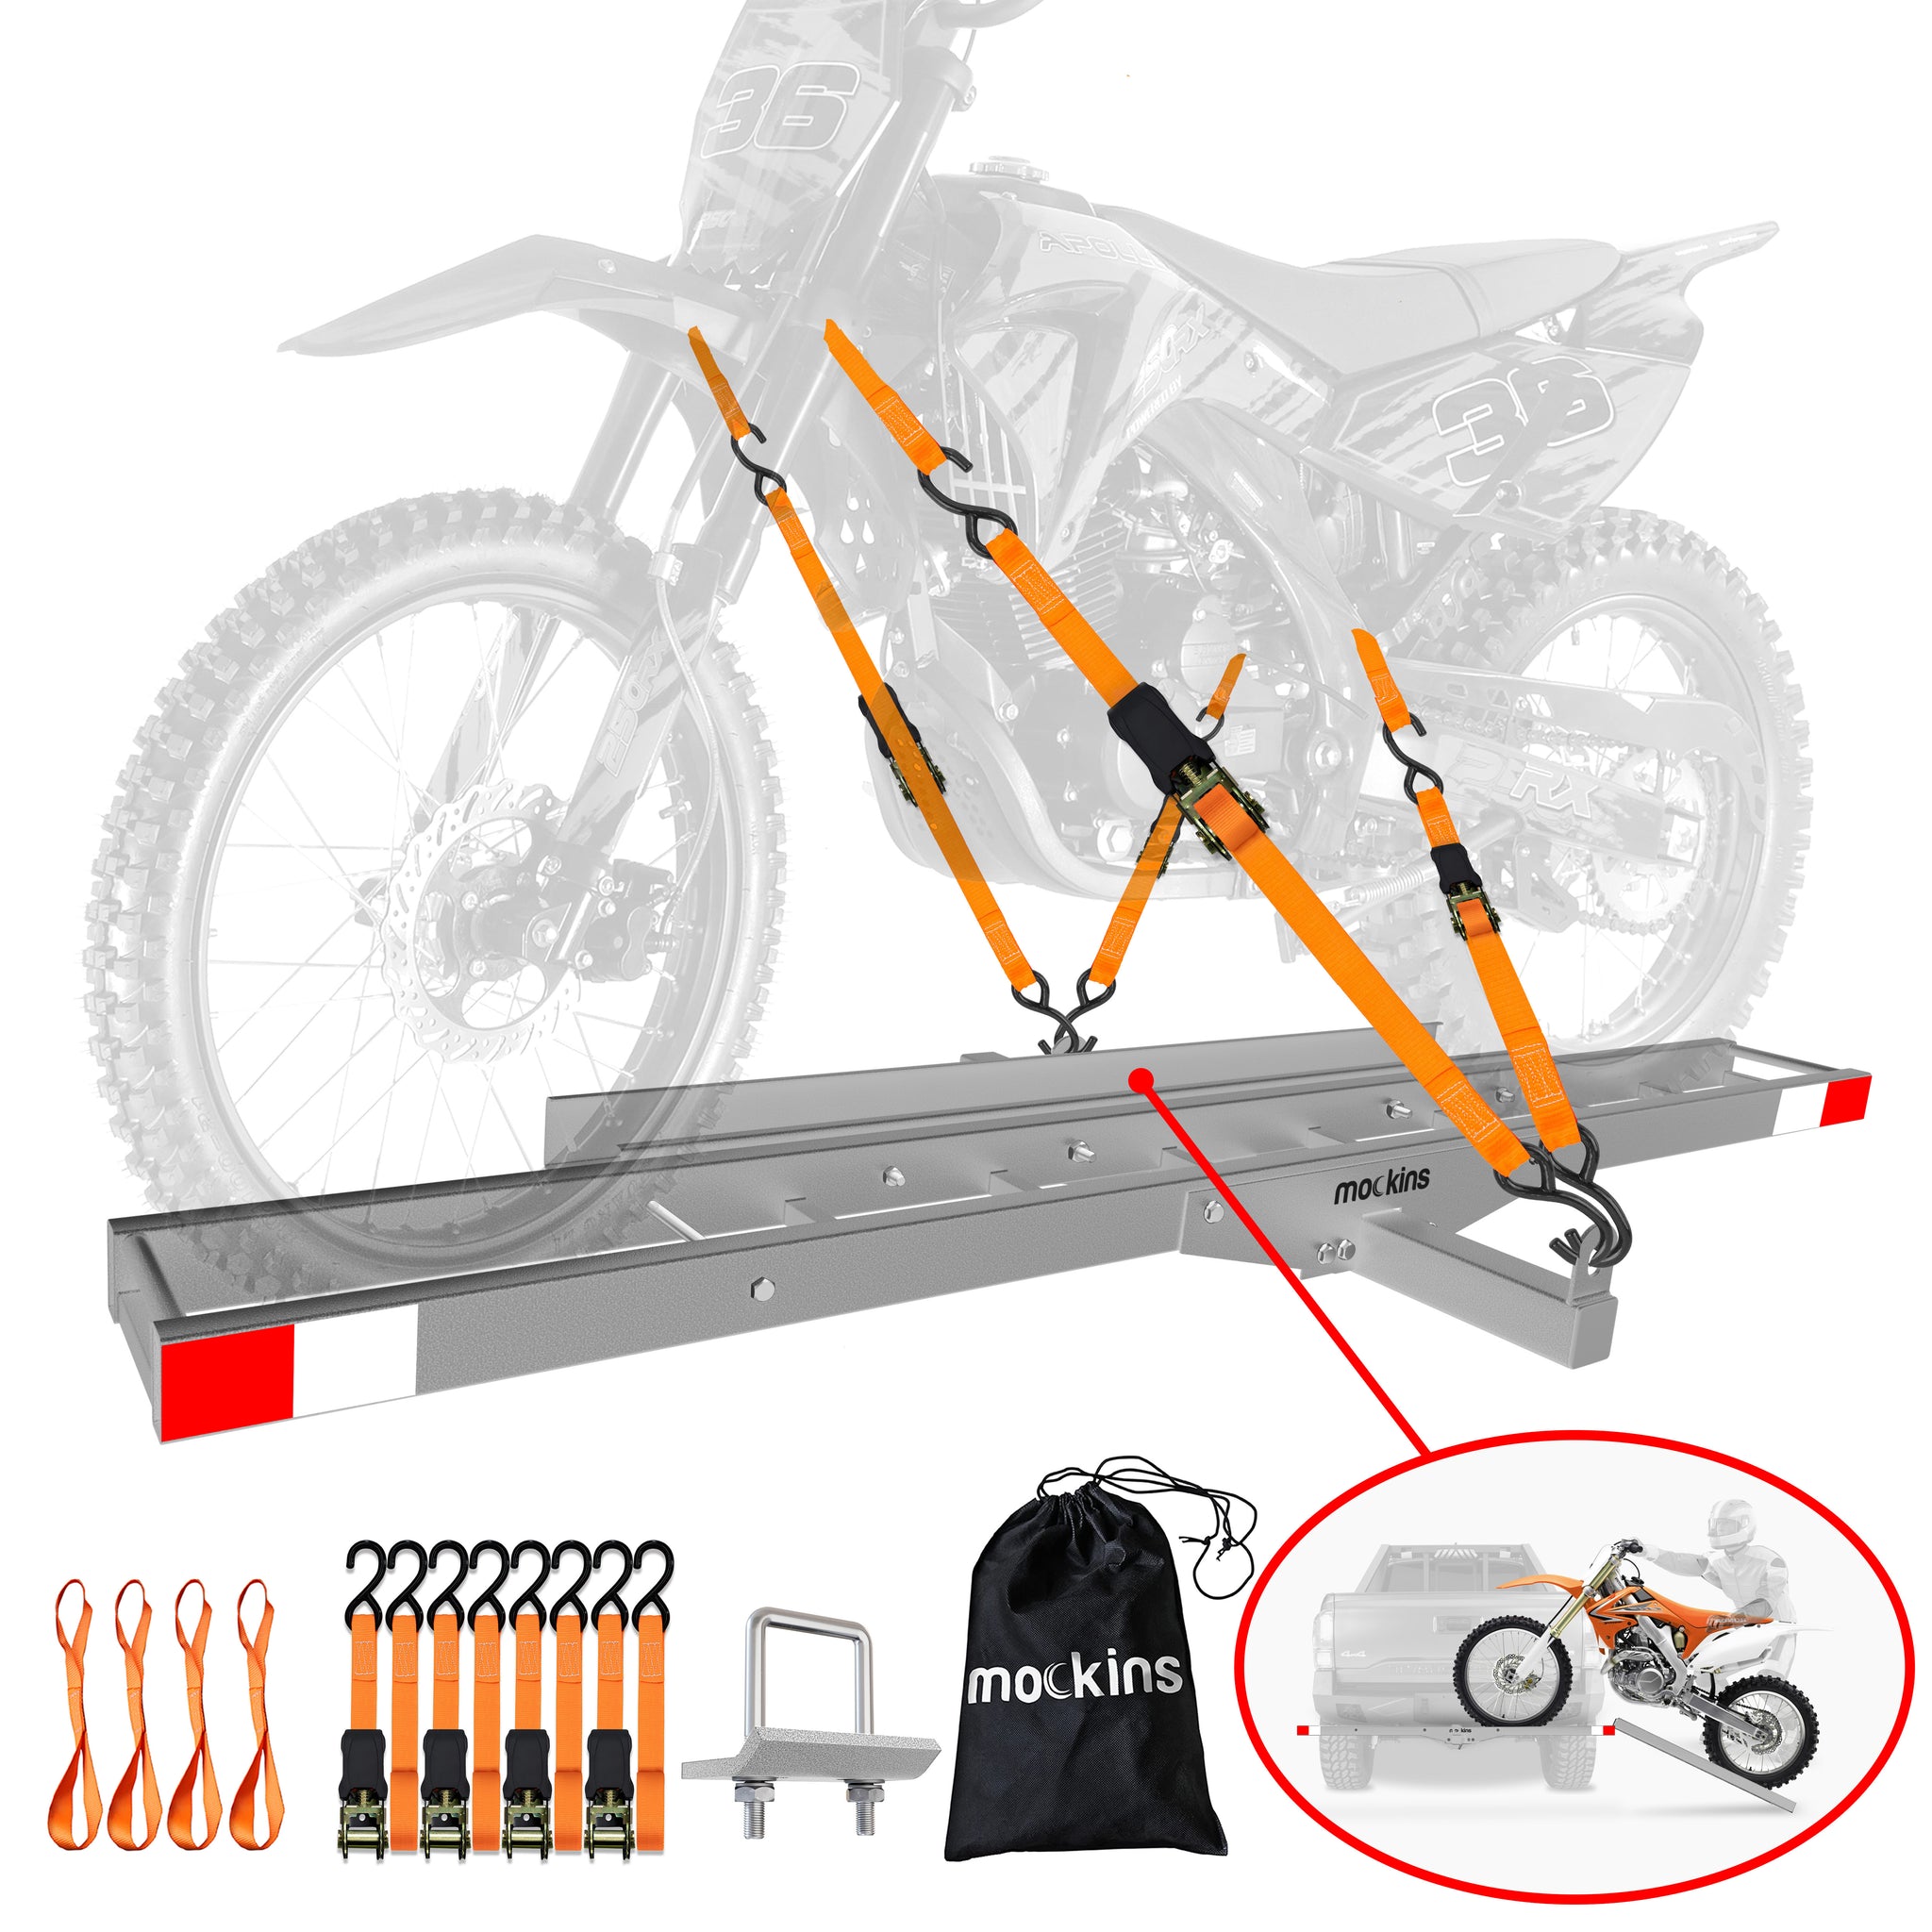 Motorcycle 500LBS Scooter Dirt Bike Carrier Hauler Hitch Mount Rack With  Loading Ramp Anti-Tilt Locking Device